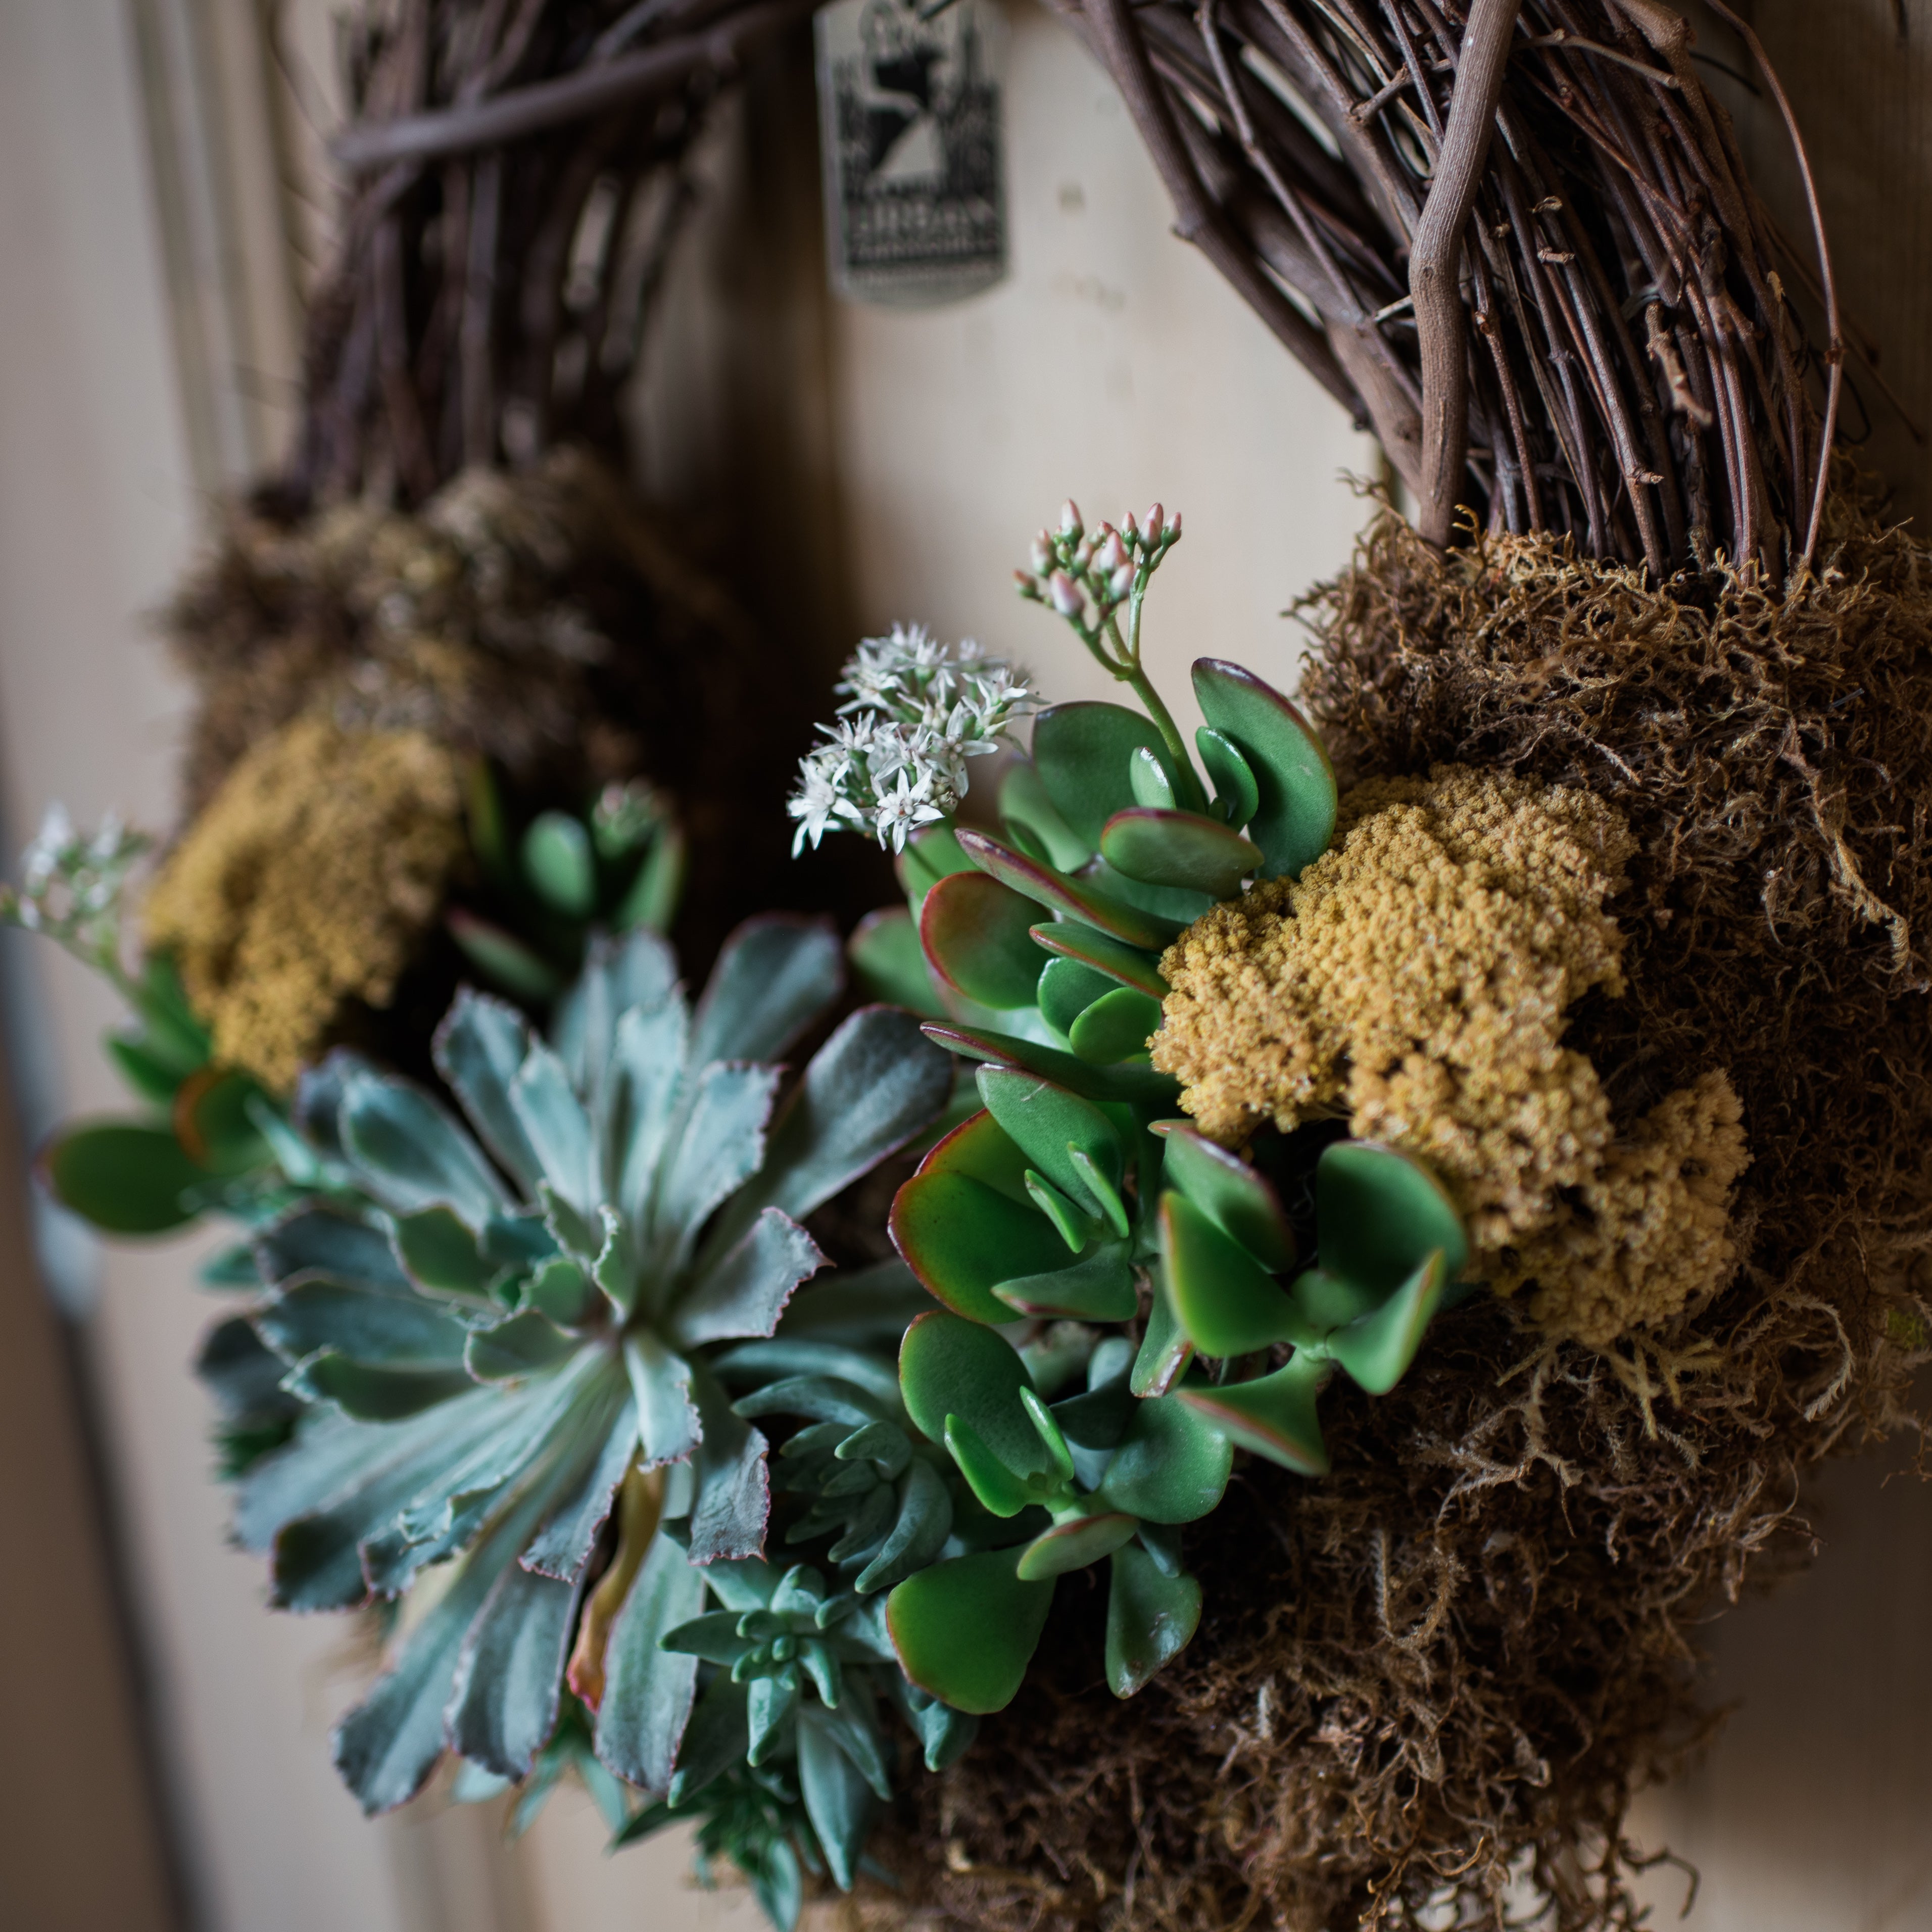 An Urban Farmgirls favorite, it’s perfect for creating a vertical garden indoors and out. Made from grapevine trimmings from the California wine country. Moss, dried flowers and locally sourced drought tolerant succulents adorn the bottom half of the wreath while the top half is exposed woven grapevines. With a dirt base, the plants are living specimens, are easy to care for and long-lasting. Each piece is unique and plants will vary slightly. 12” diameter. Send the perfect living green gift.